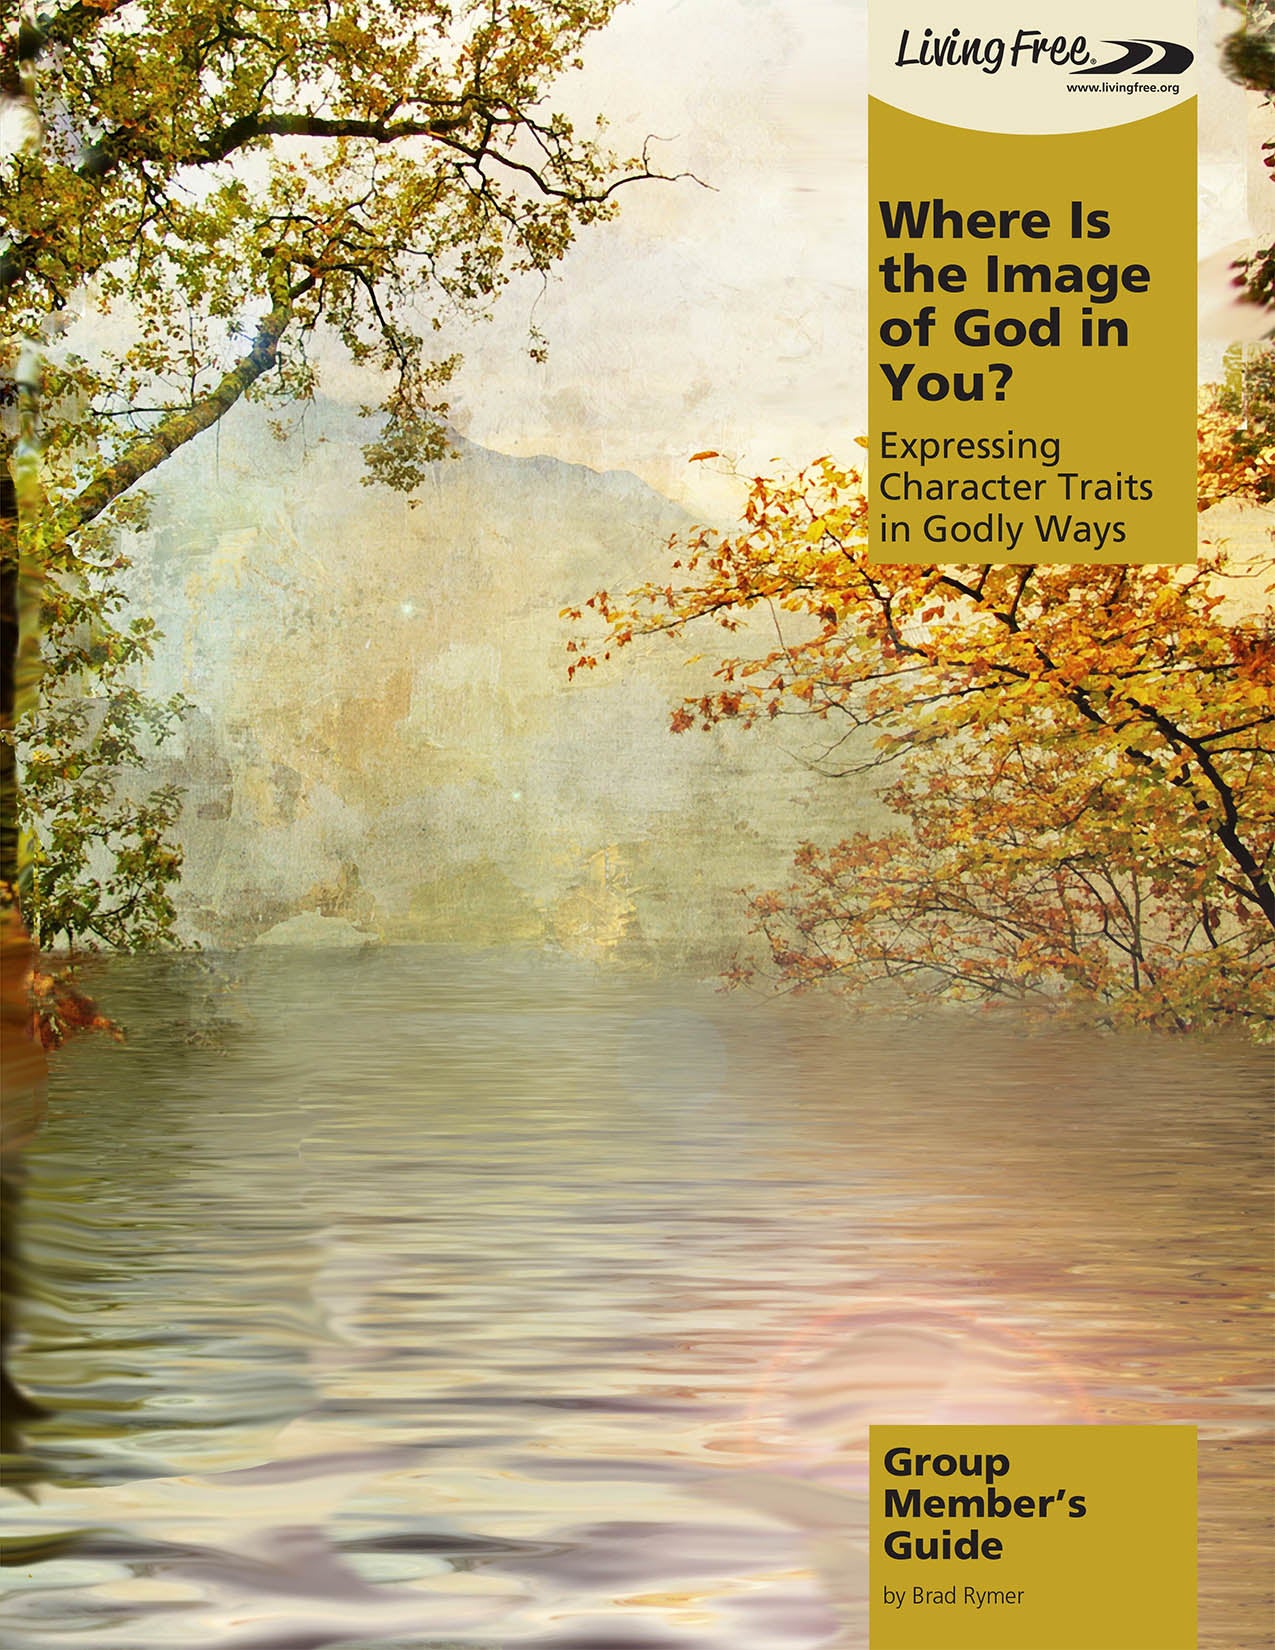 Where is the Image of God in You? Group Member's Guide